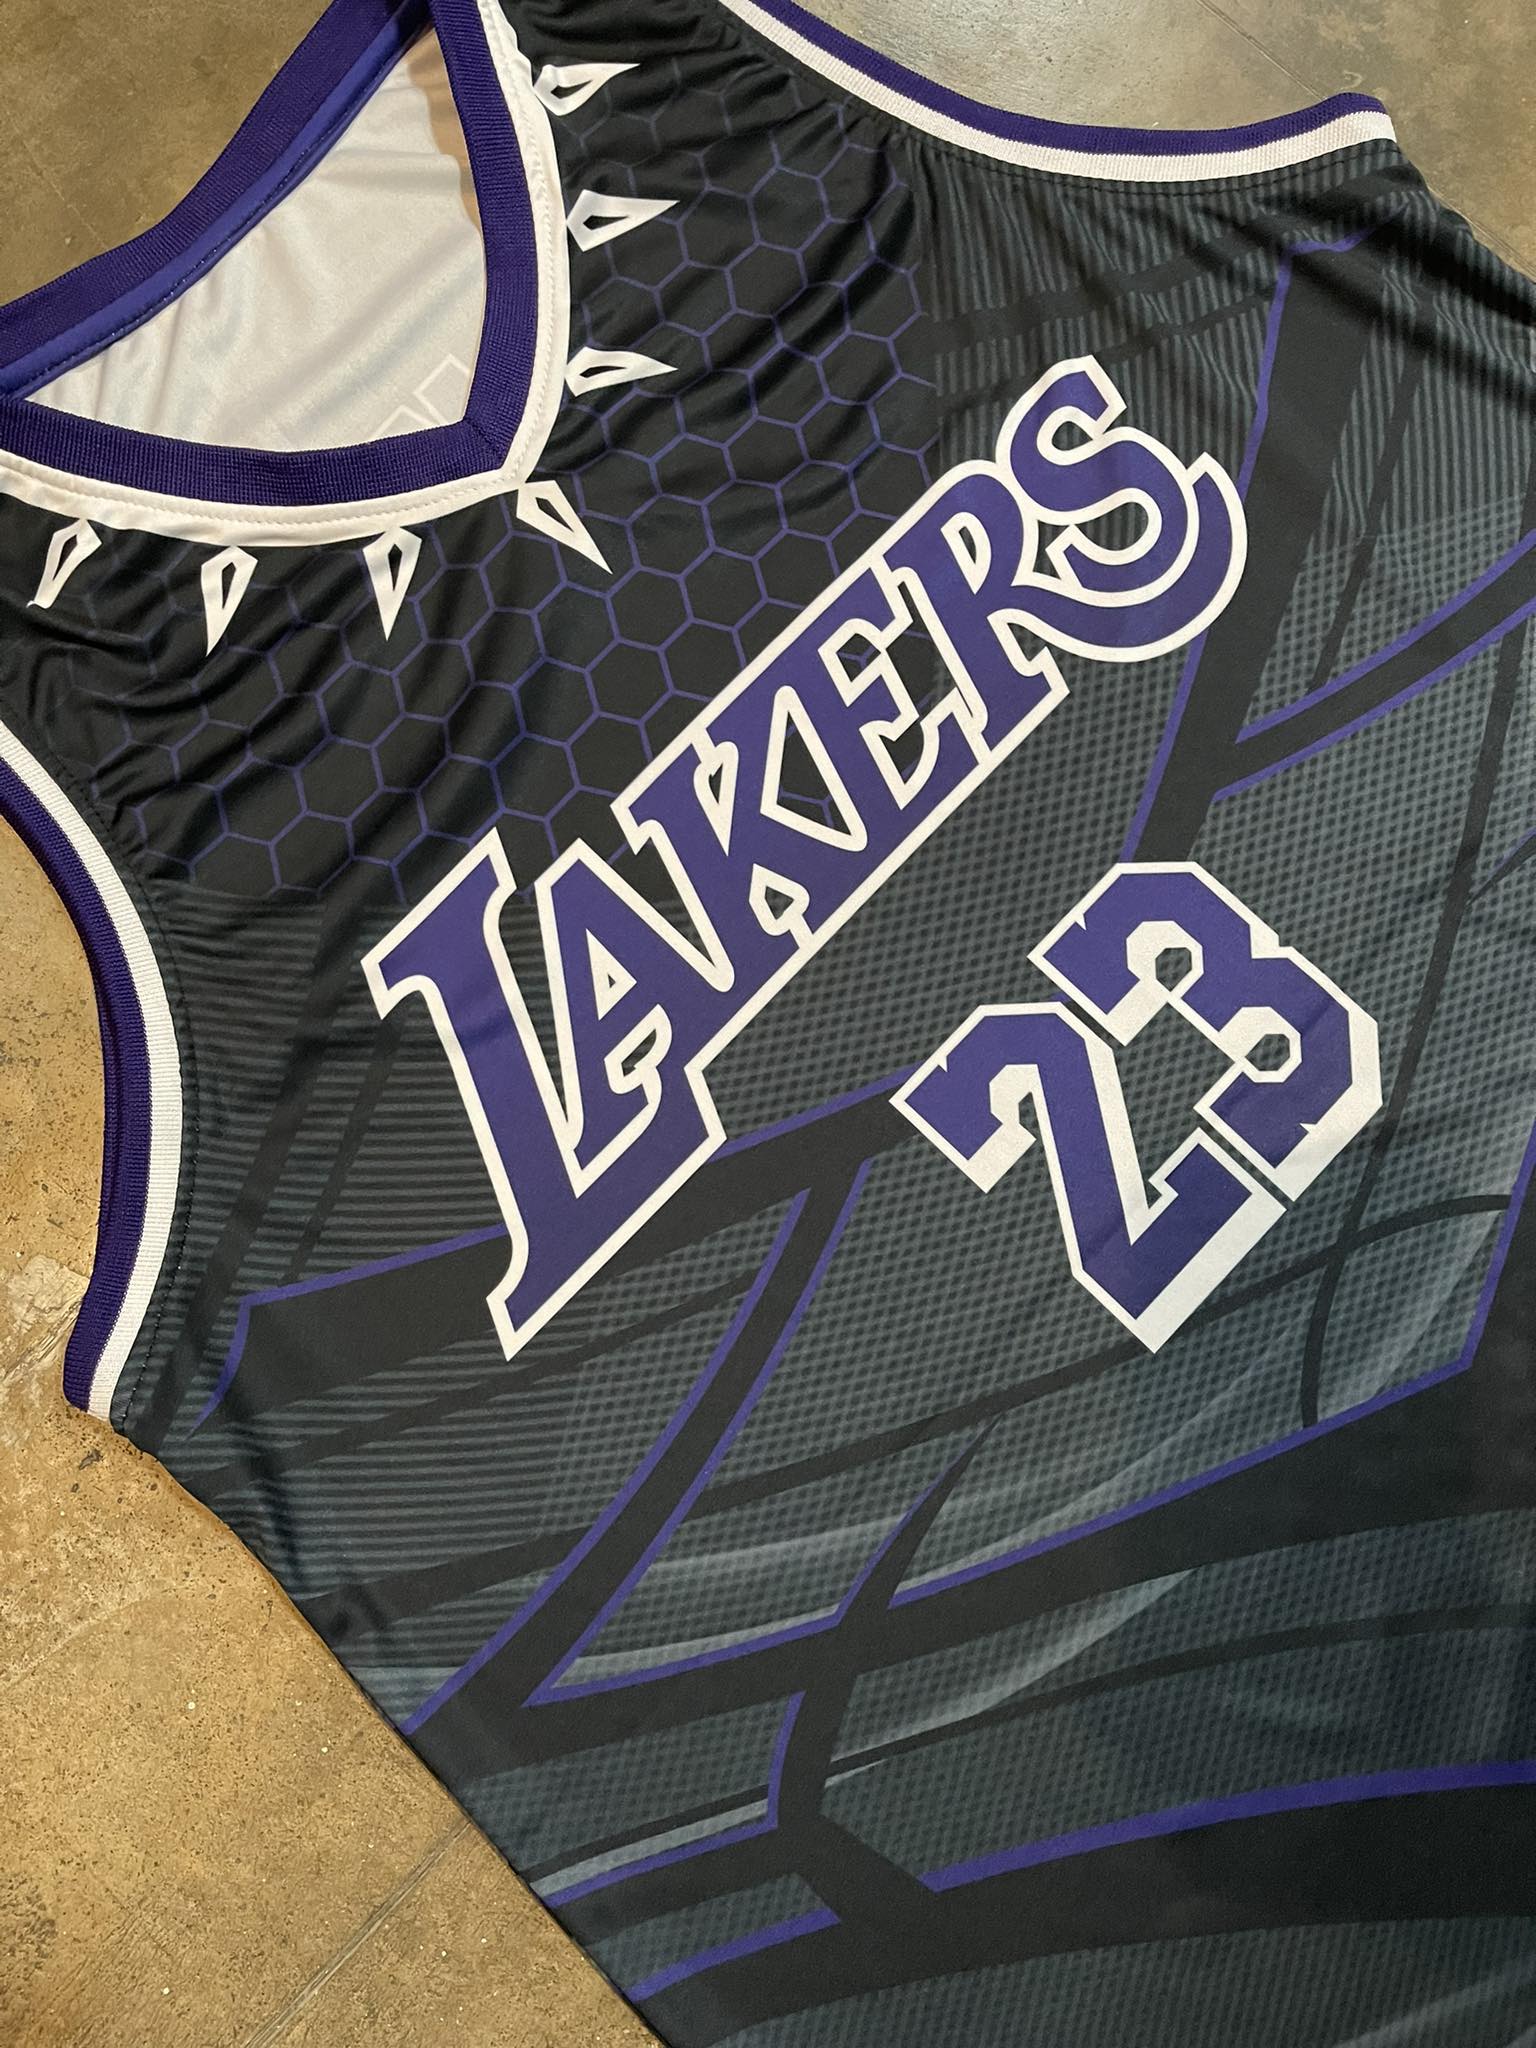 Bnip Lakers Black Panther 23 Limited Edition Jersey Xxl Rare!!!wakaenda  Forever